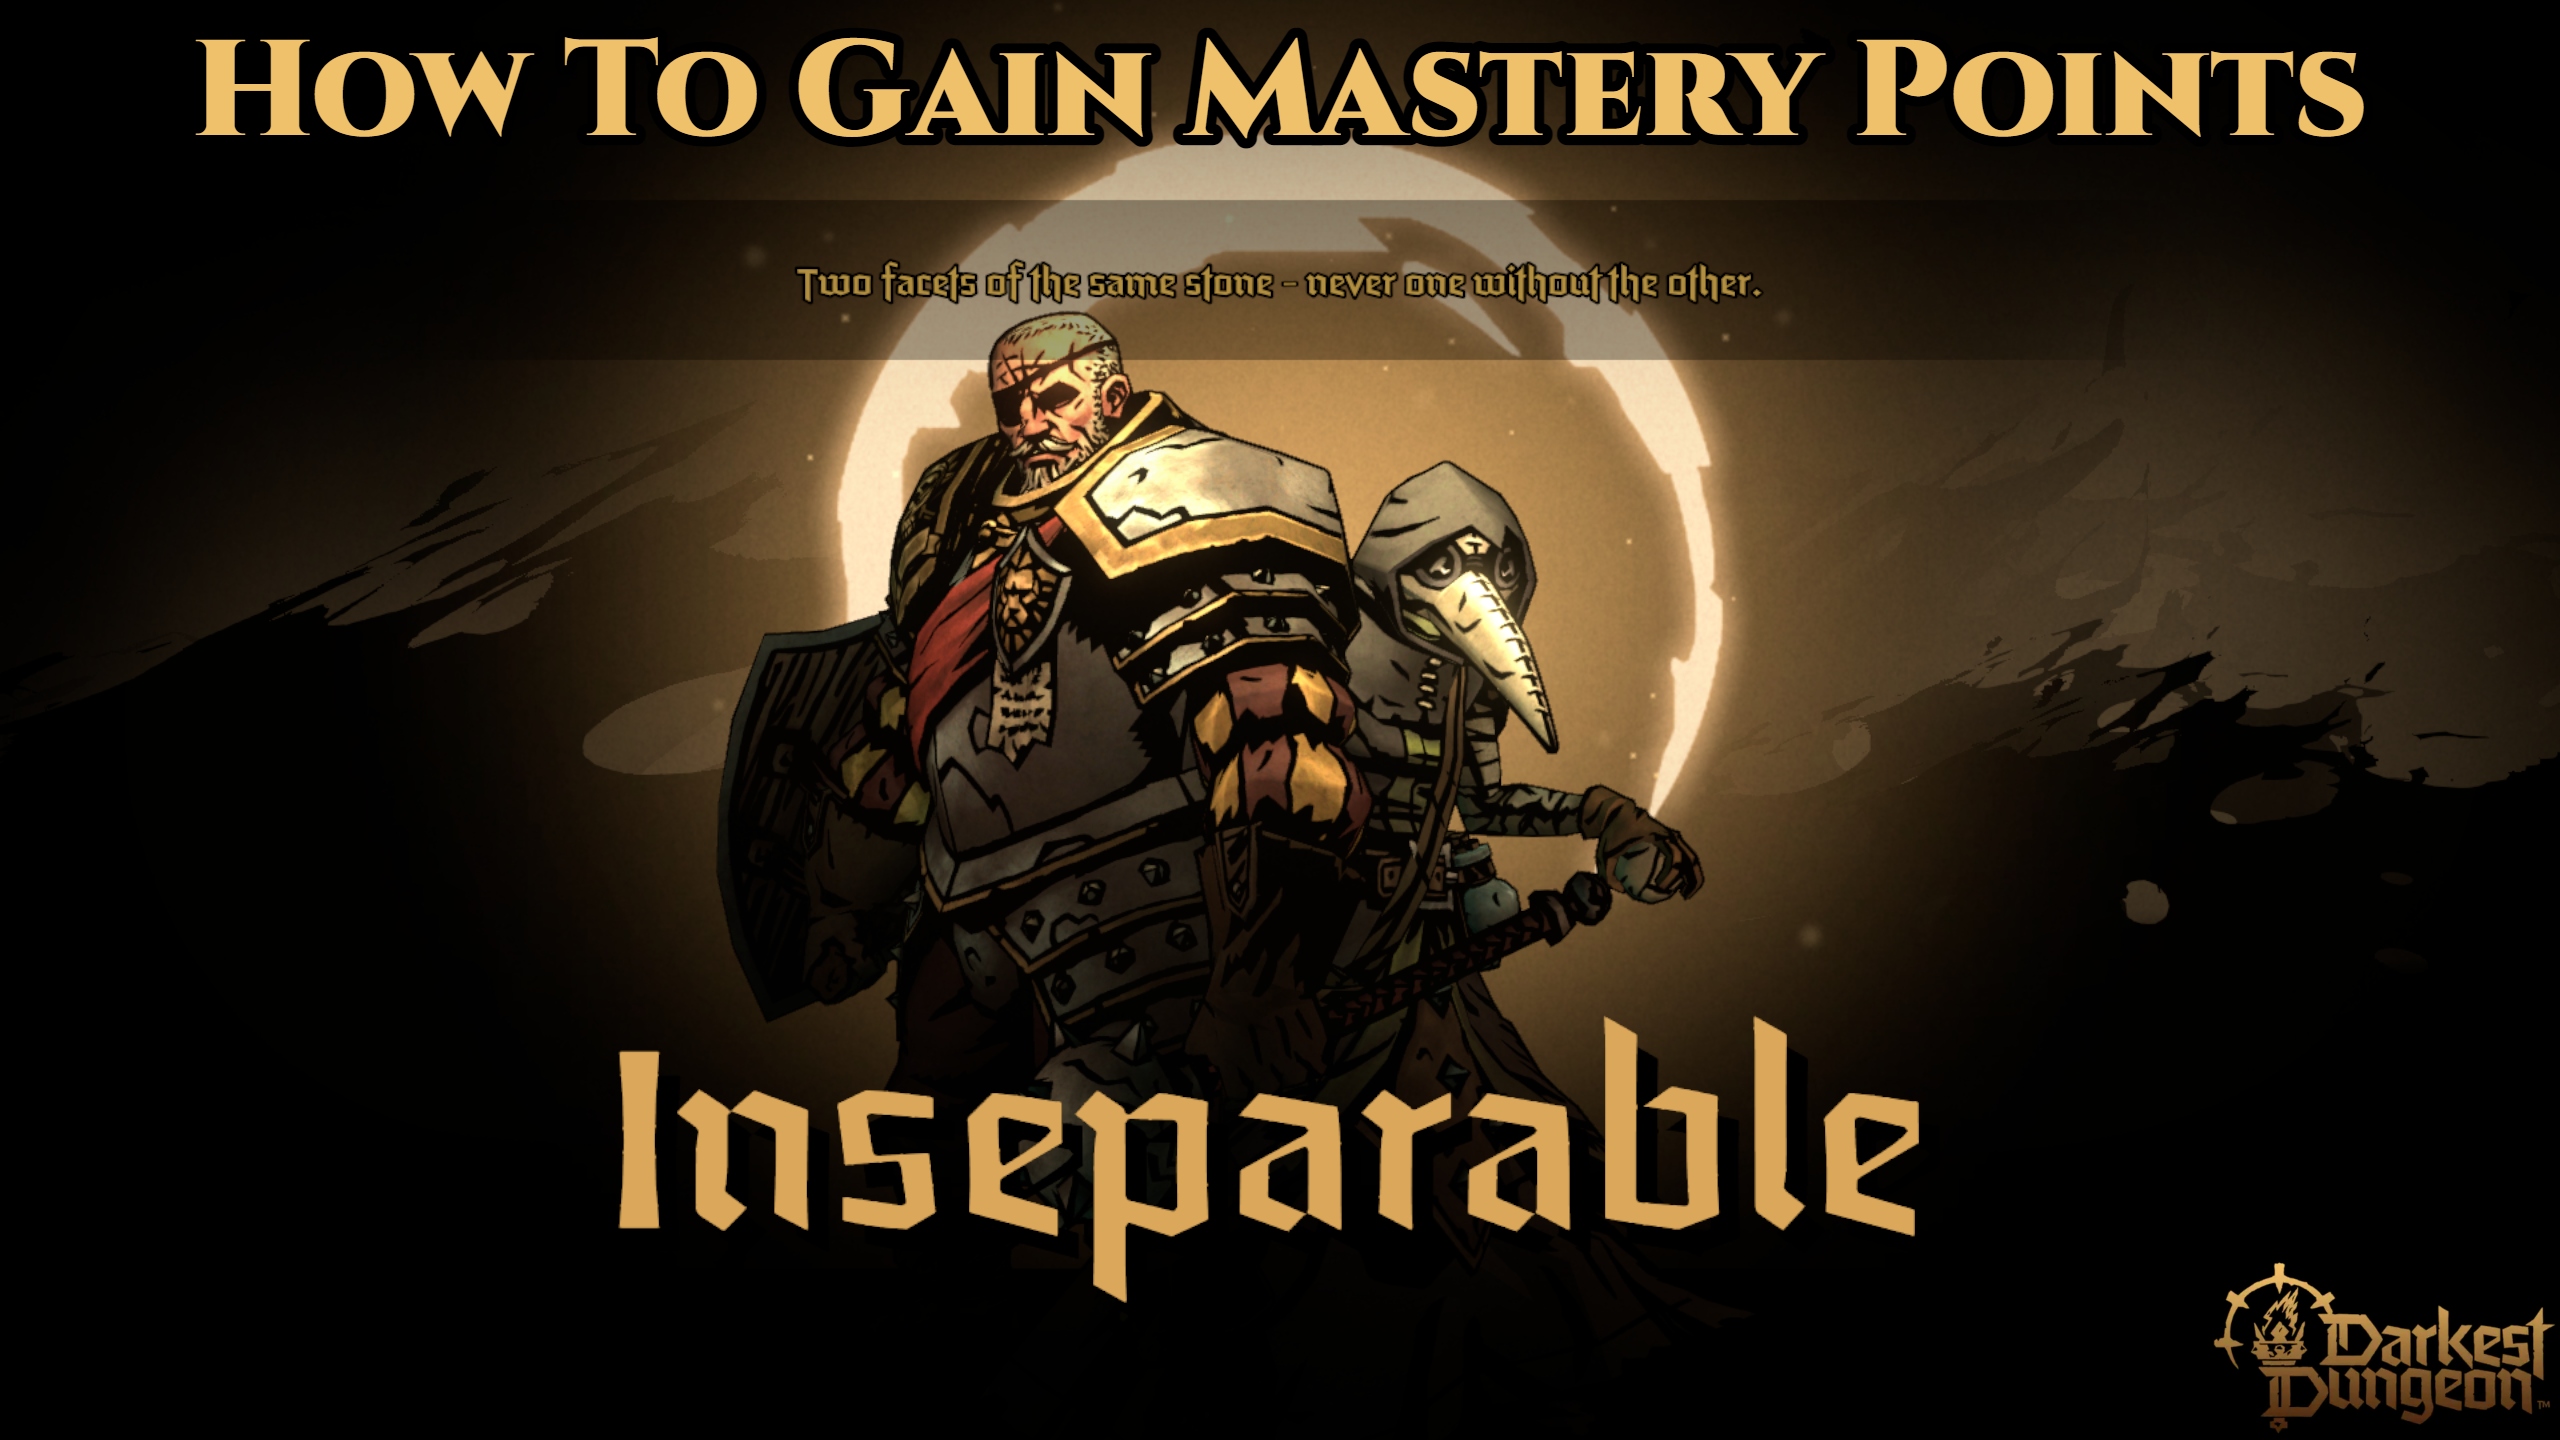 You are currently viewing Darkest Dungeon 2: How To Gain Mastery Points